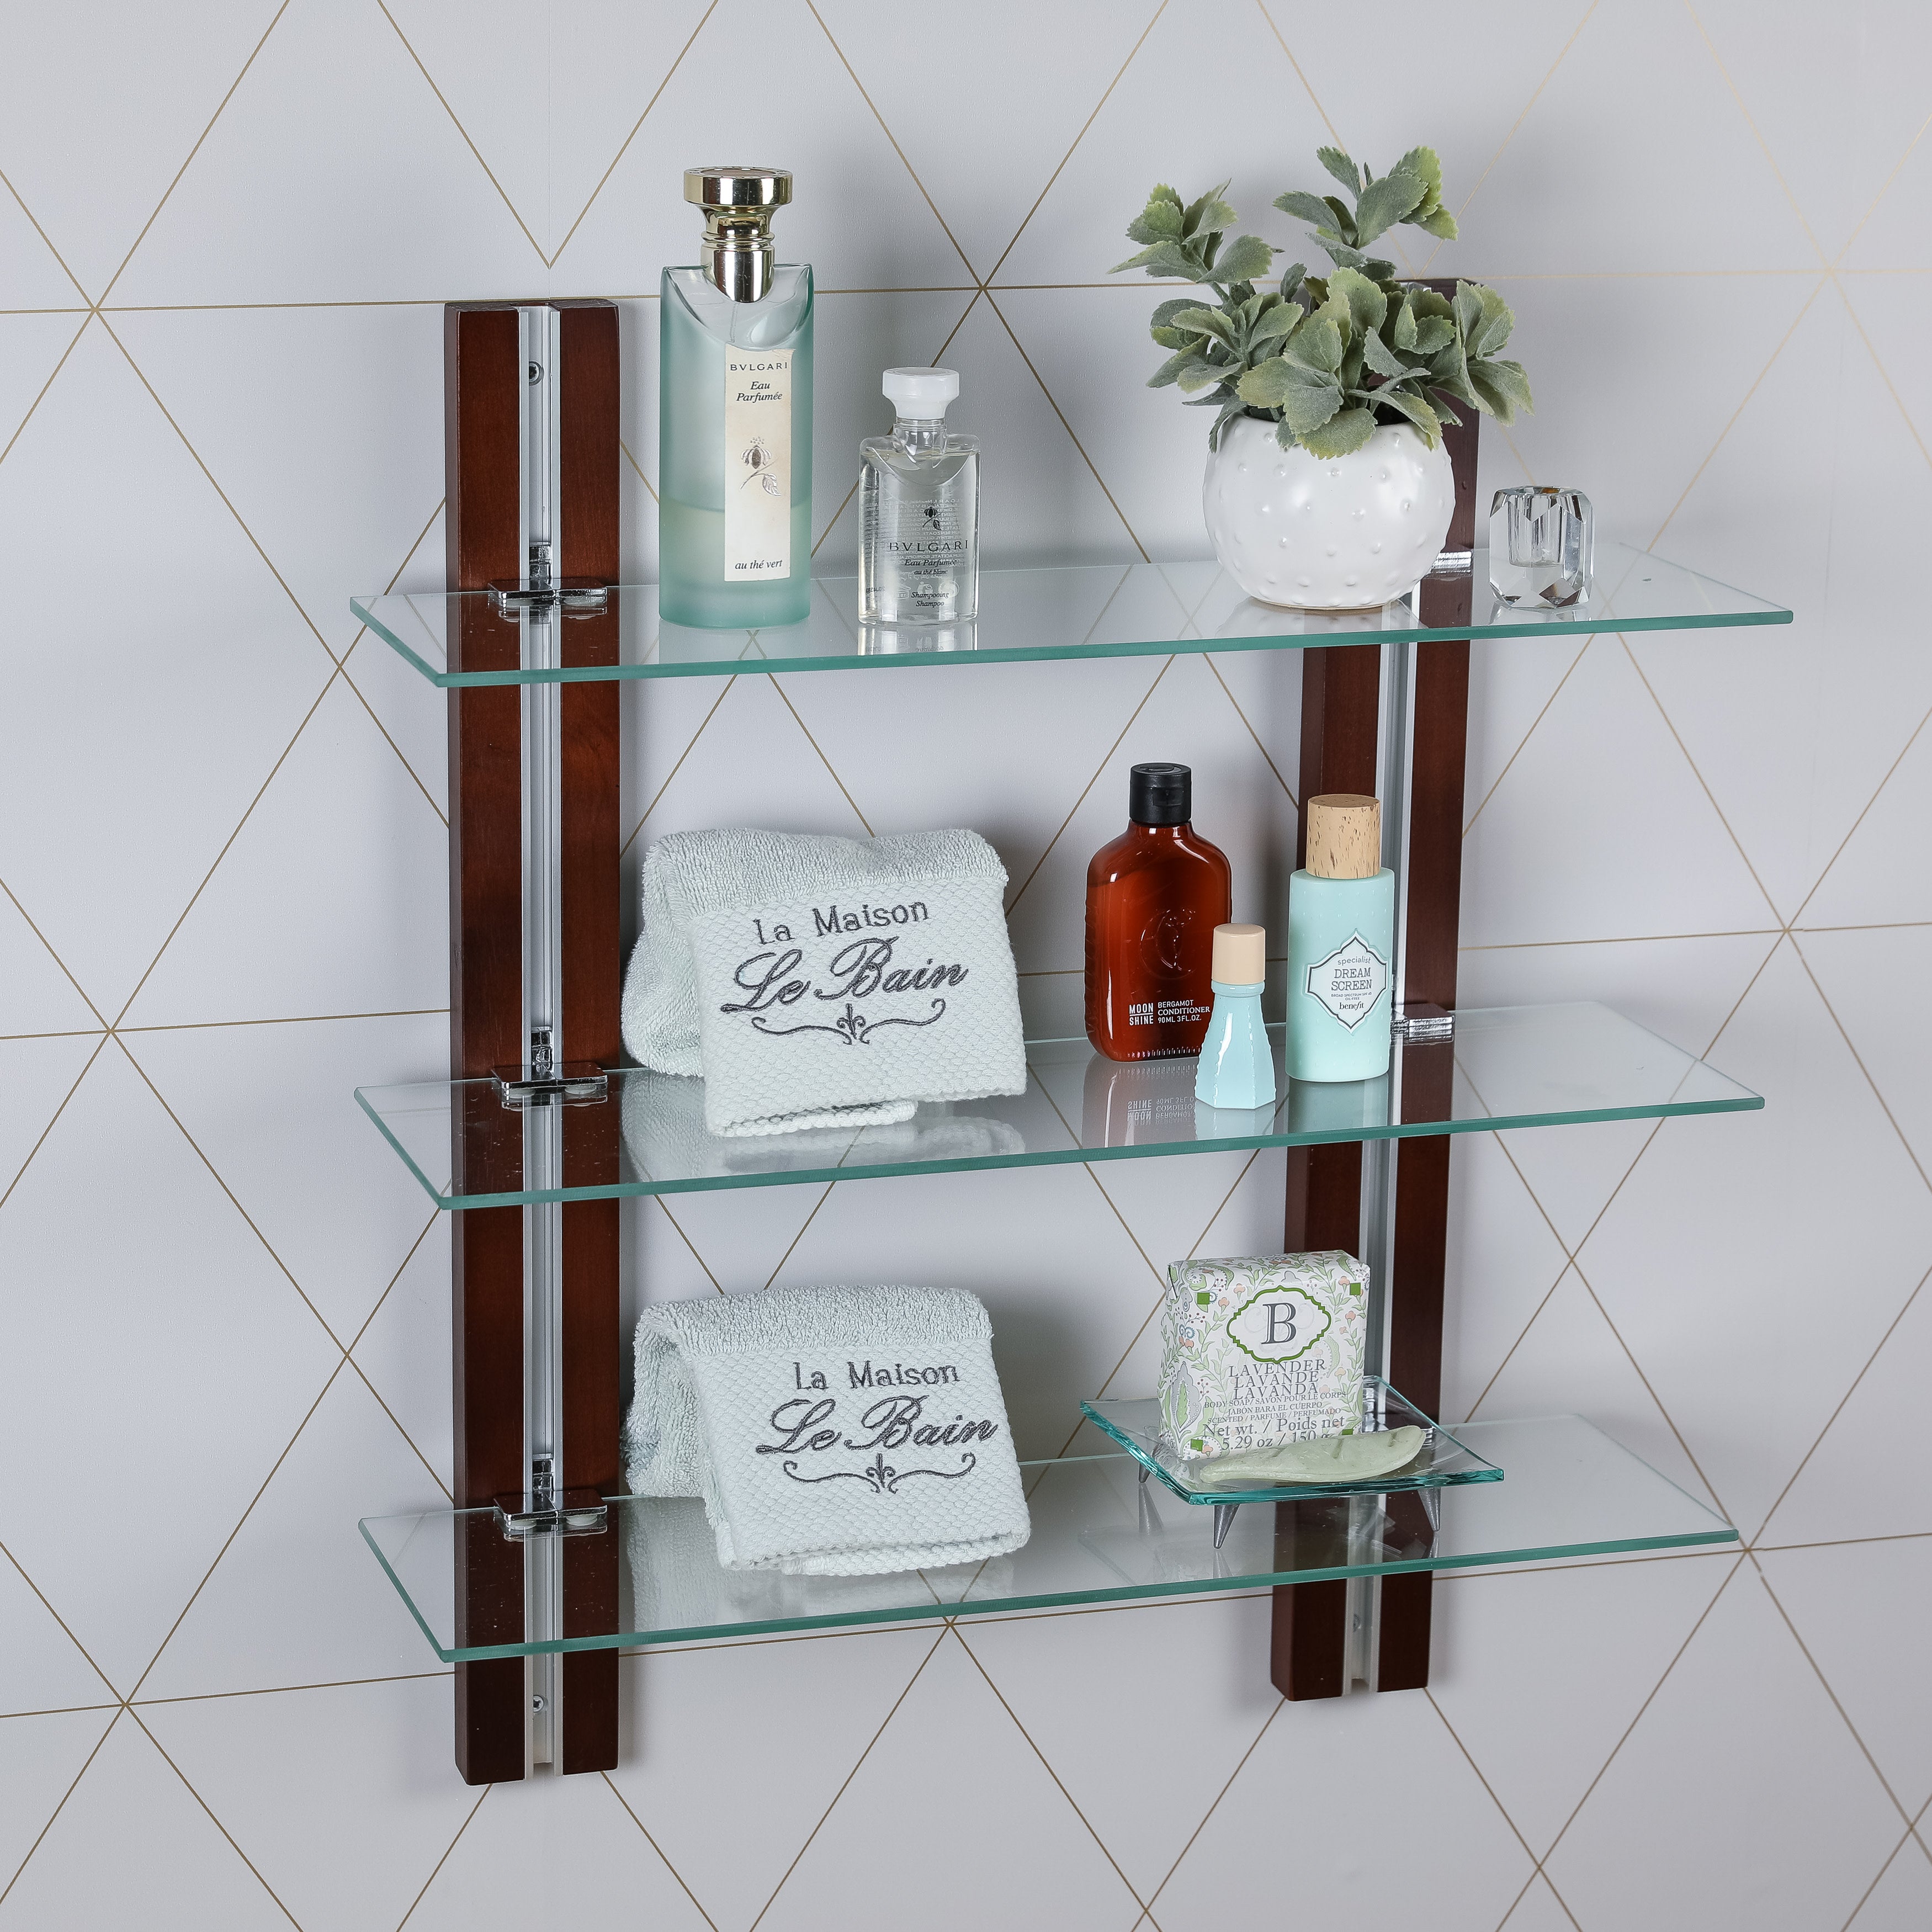 2 Tier Wall Mount Shelving Unit with Towel Rack and Trays Chrome/White -  Danya B.